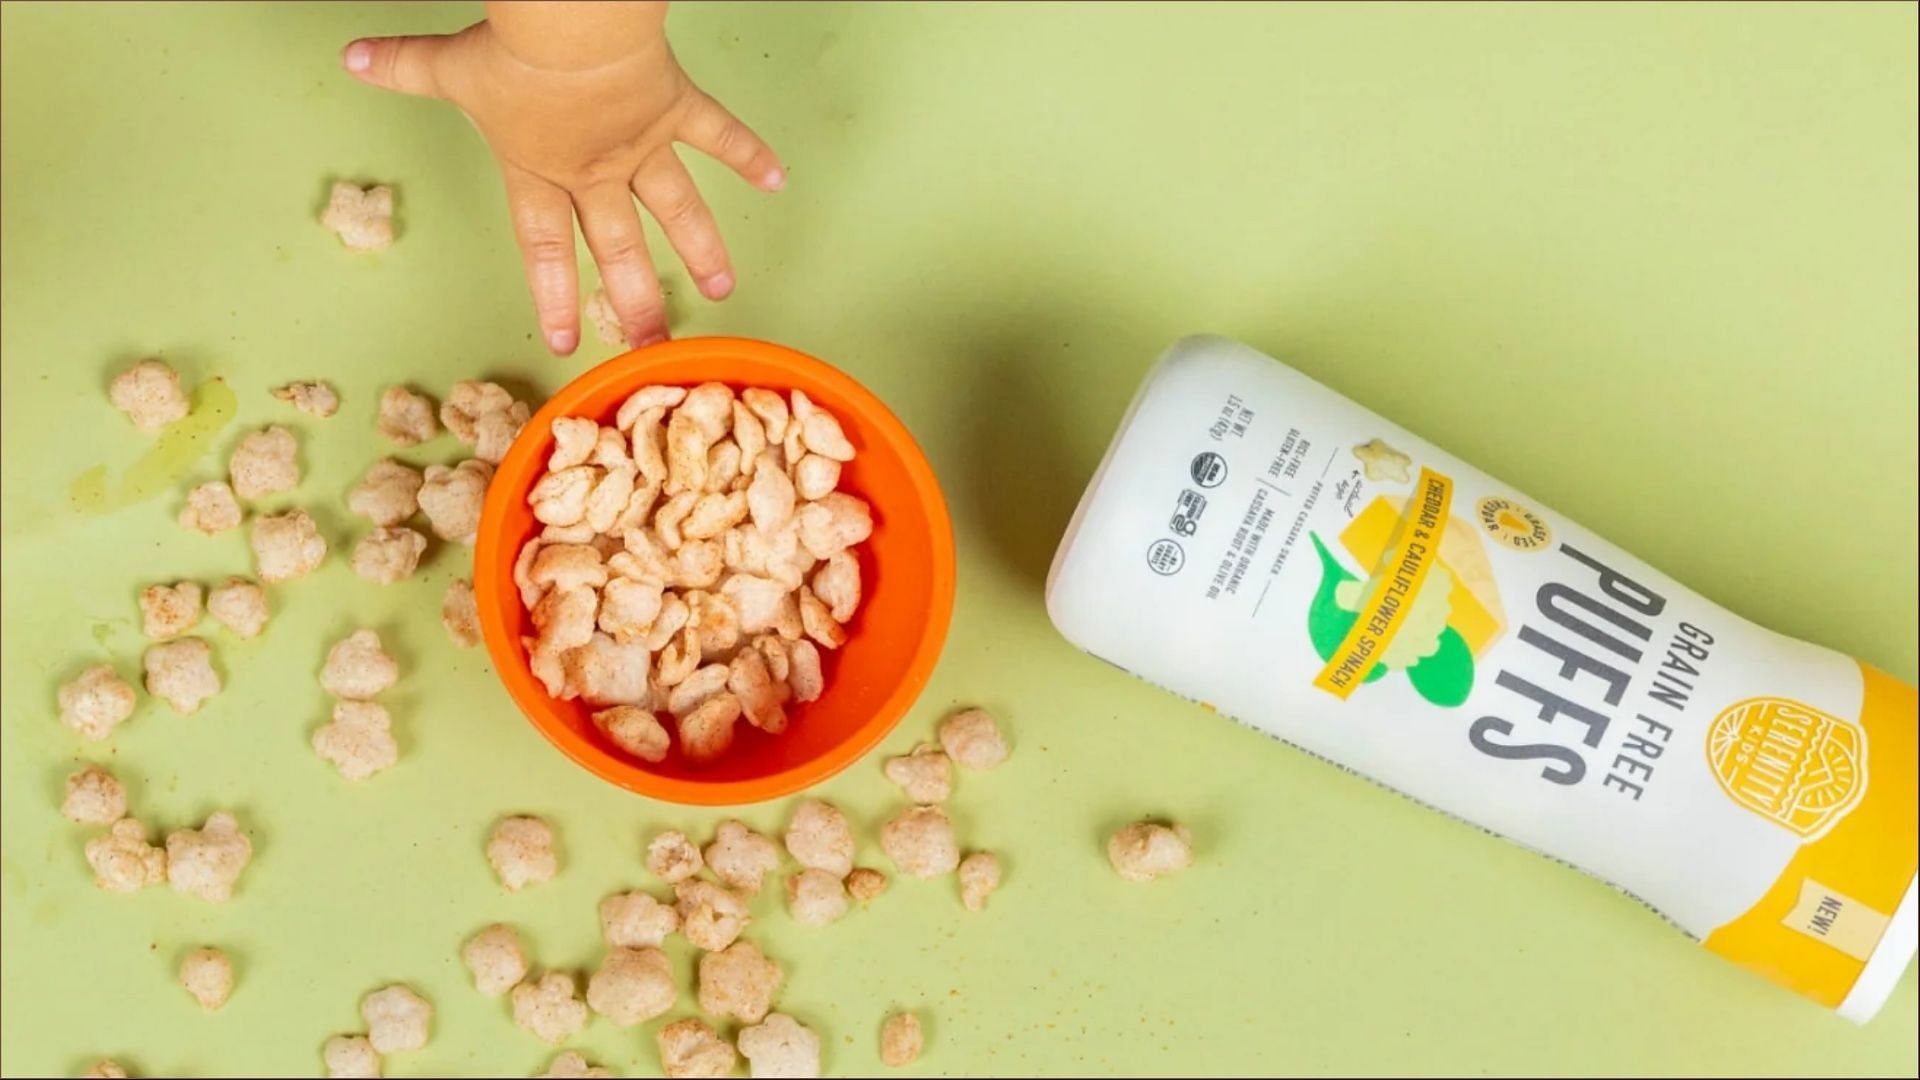 The new White Cheddar with Cauliflower &amp; Spinach puffed snack comes in 1.5 oz containers (Image via Serenity Kids)